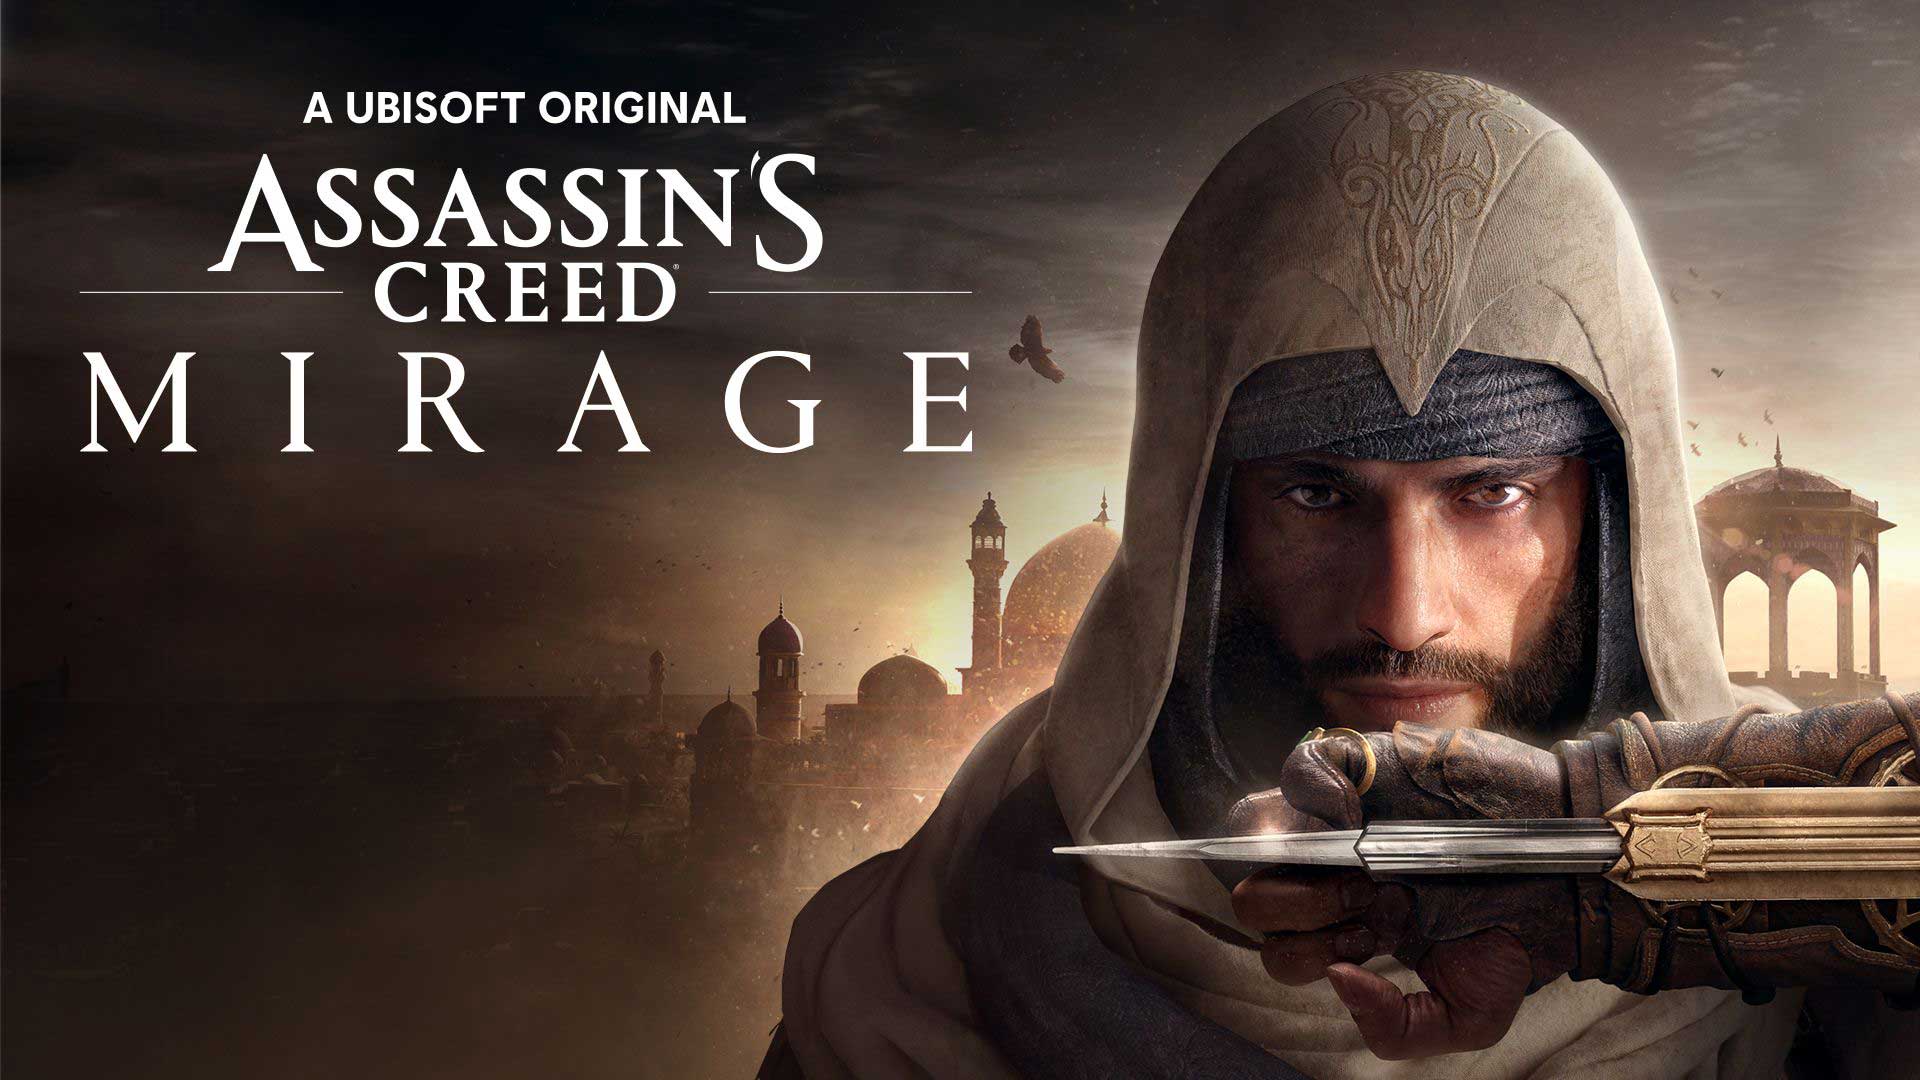 Assassin’s Creed Mirage, Game To Relax, gametorelax.com